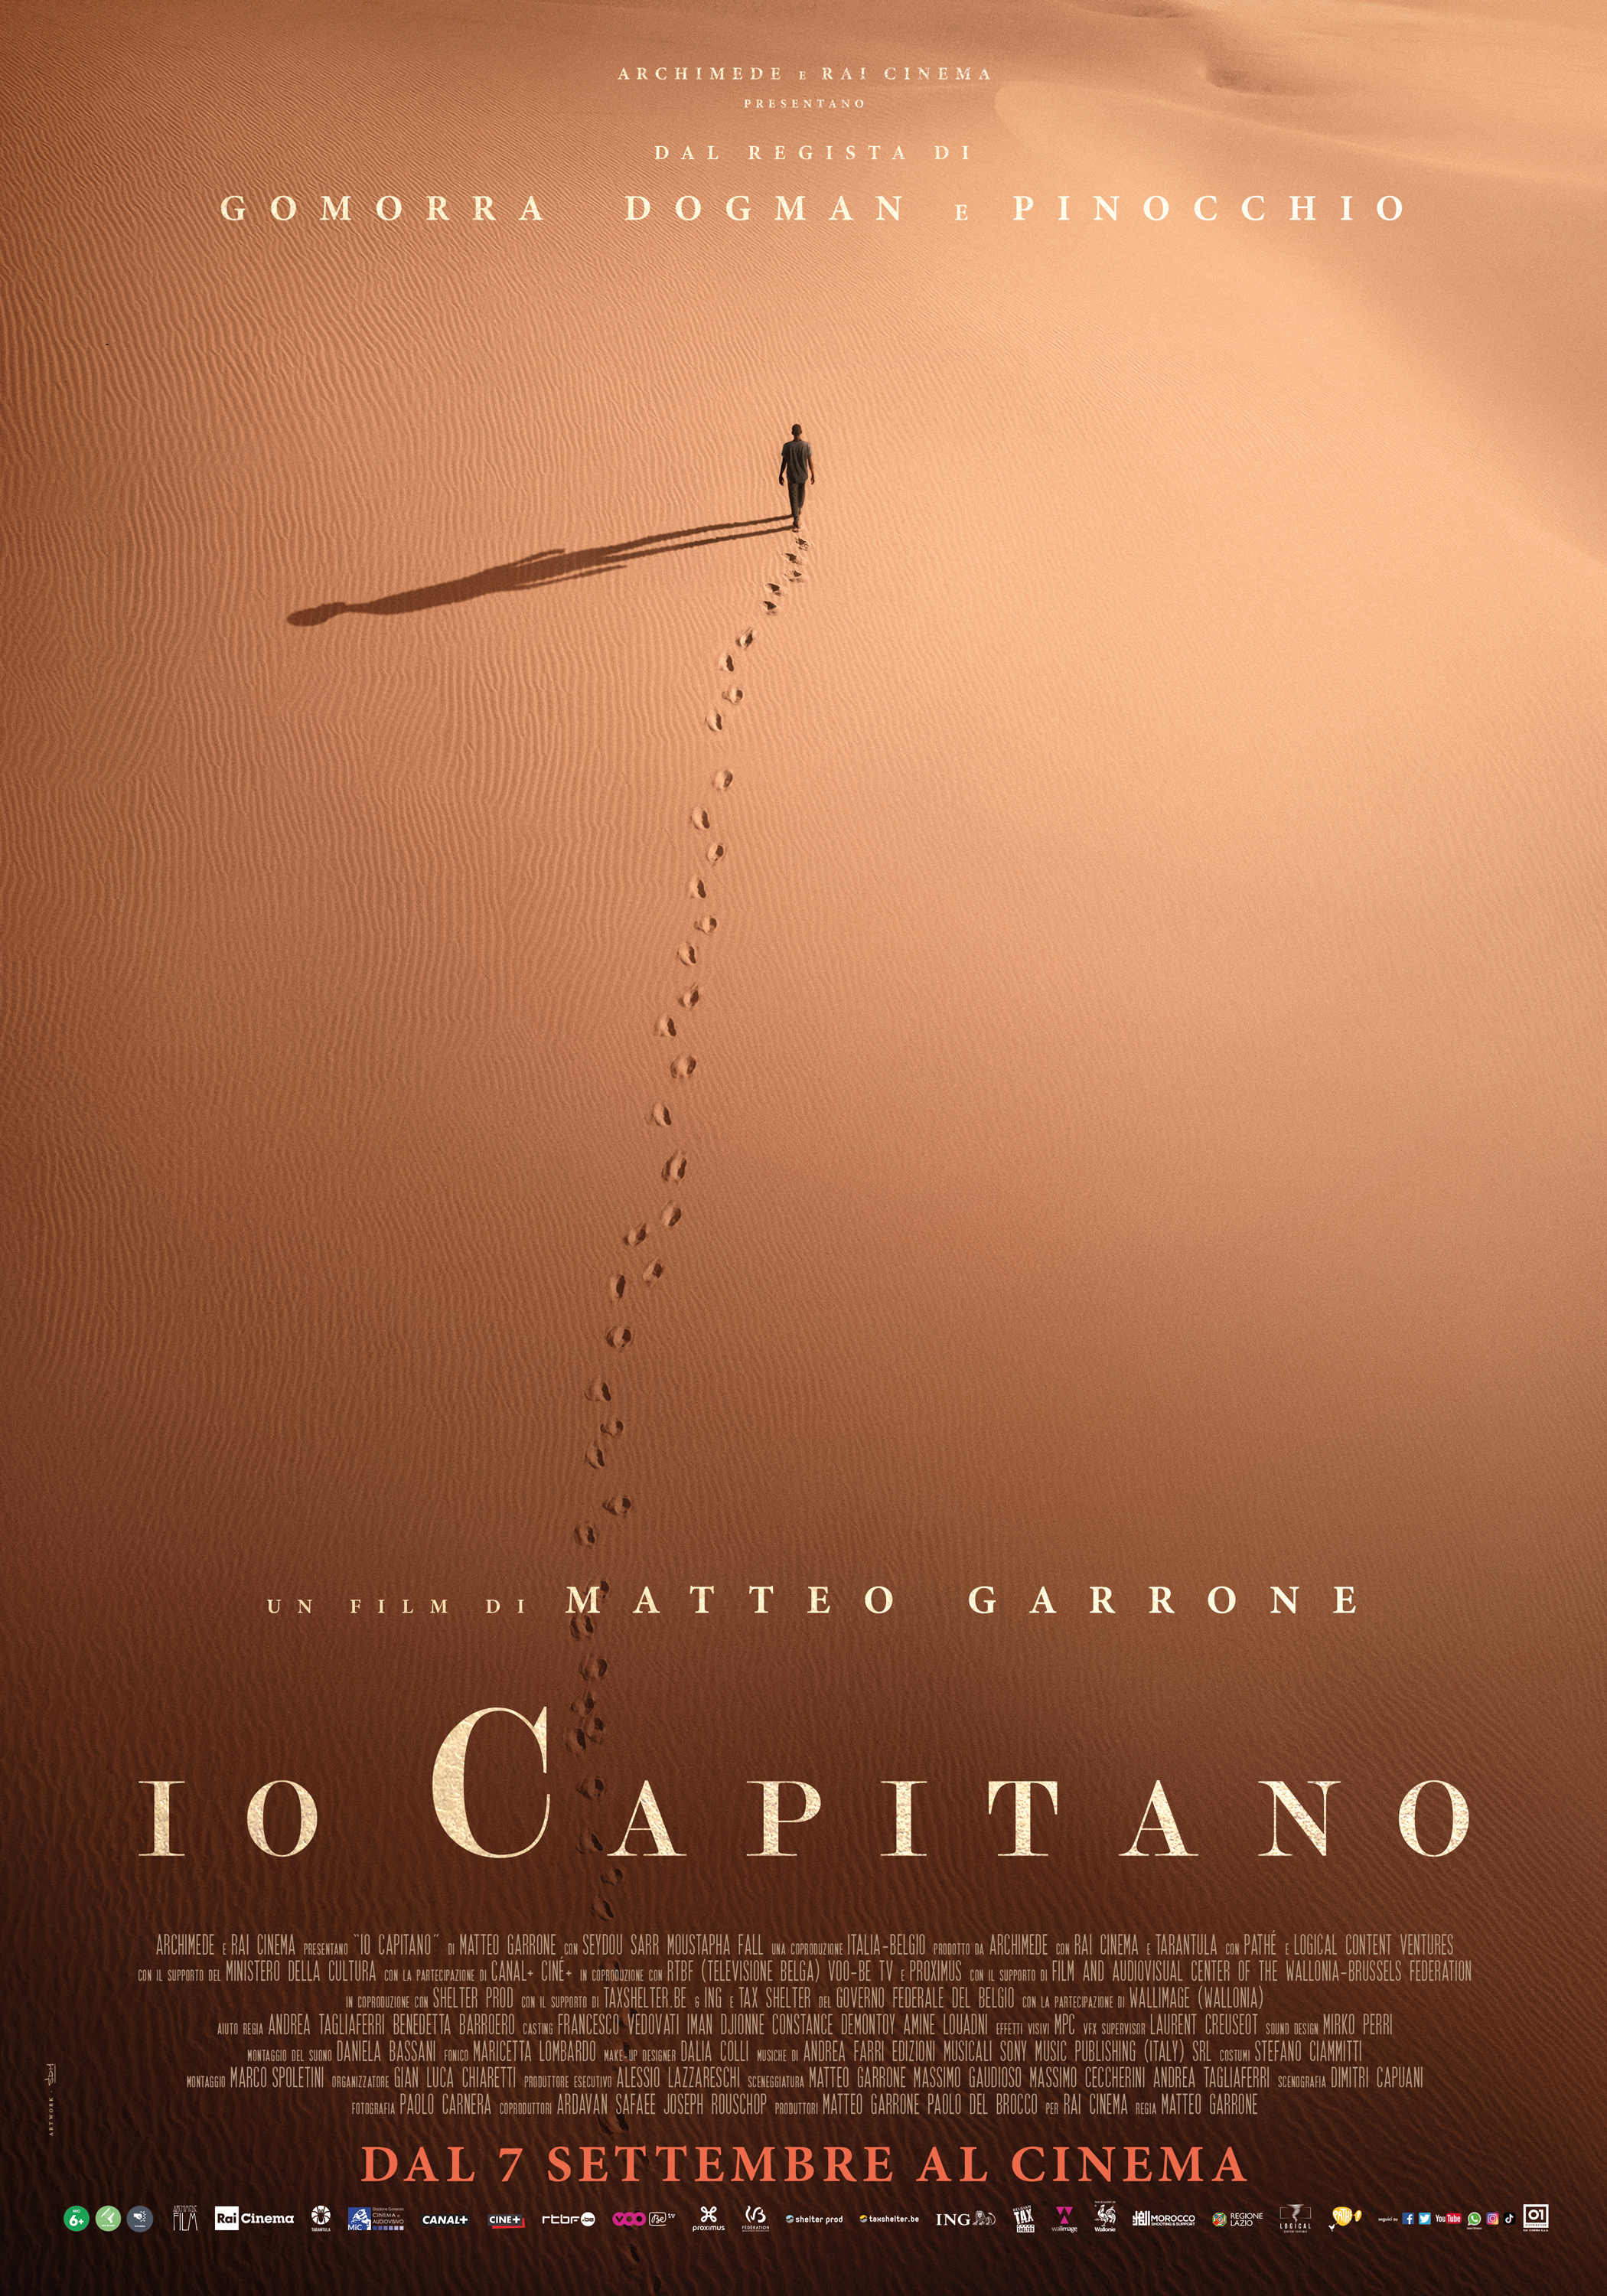 “Io Capitano”, poster of the new film by Matteo Garrone |  RB Casting